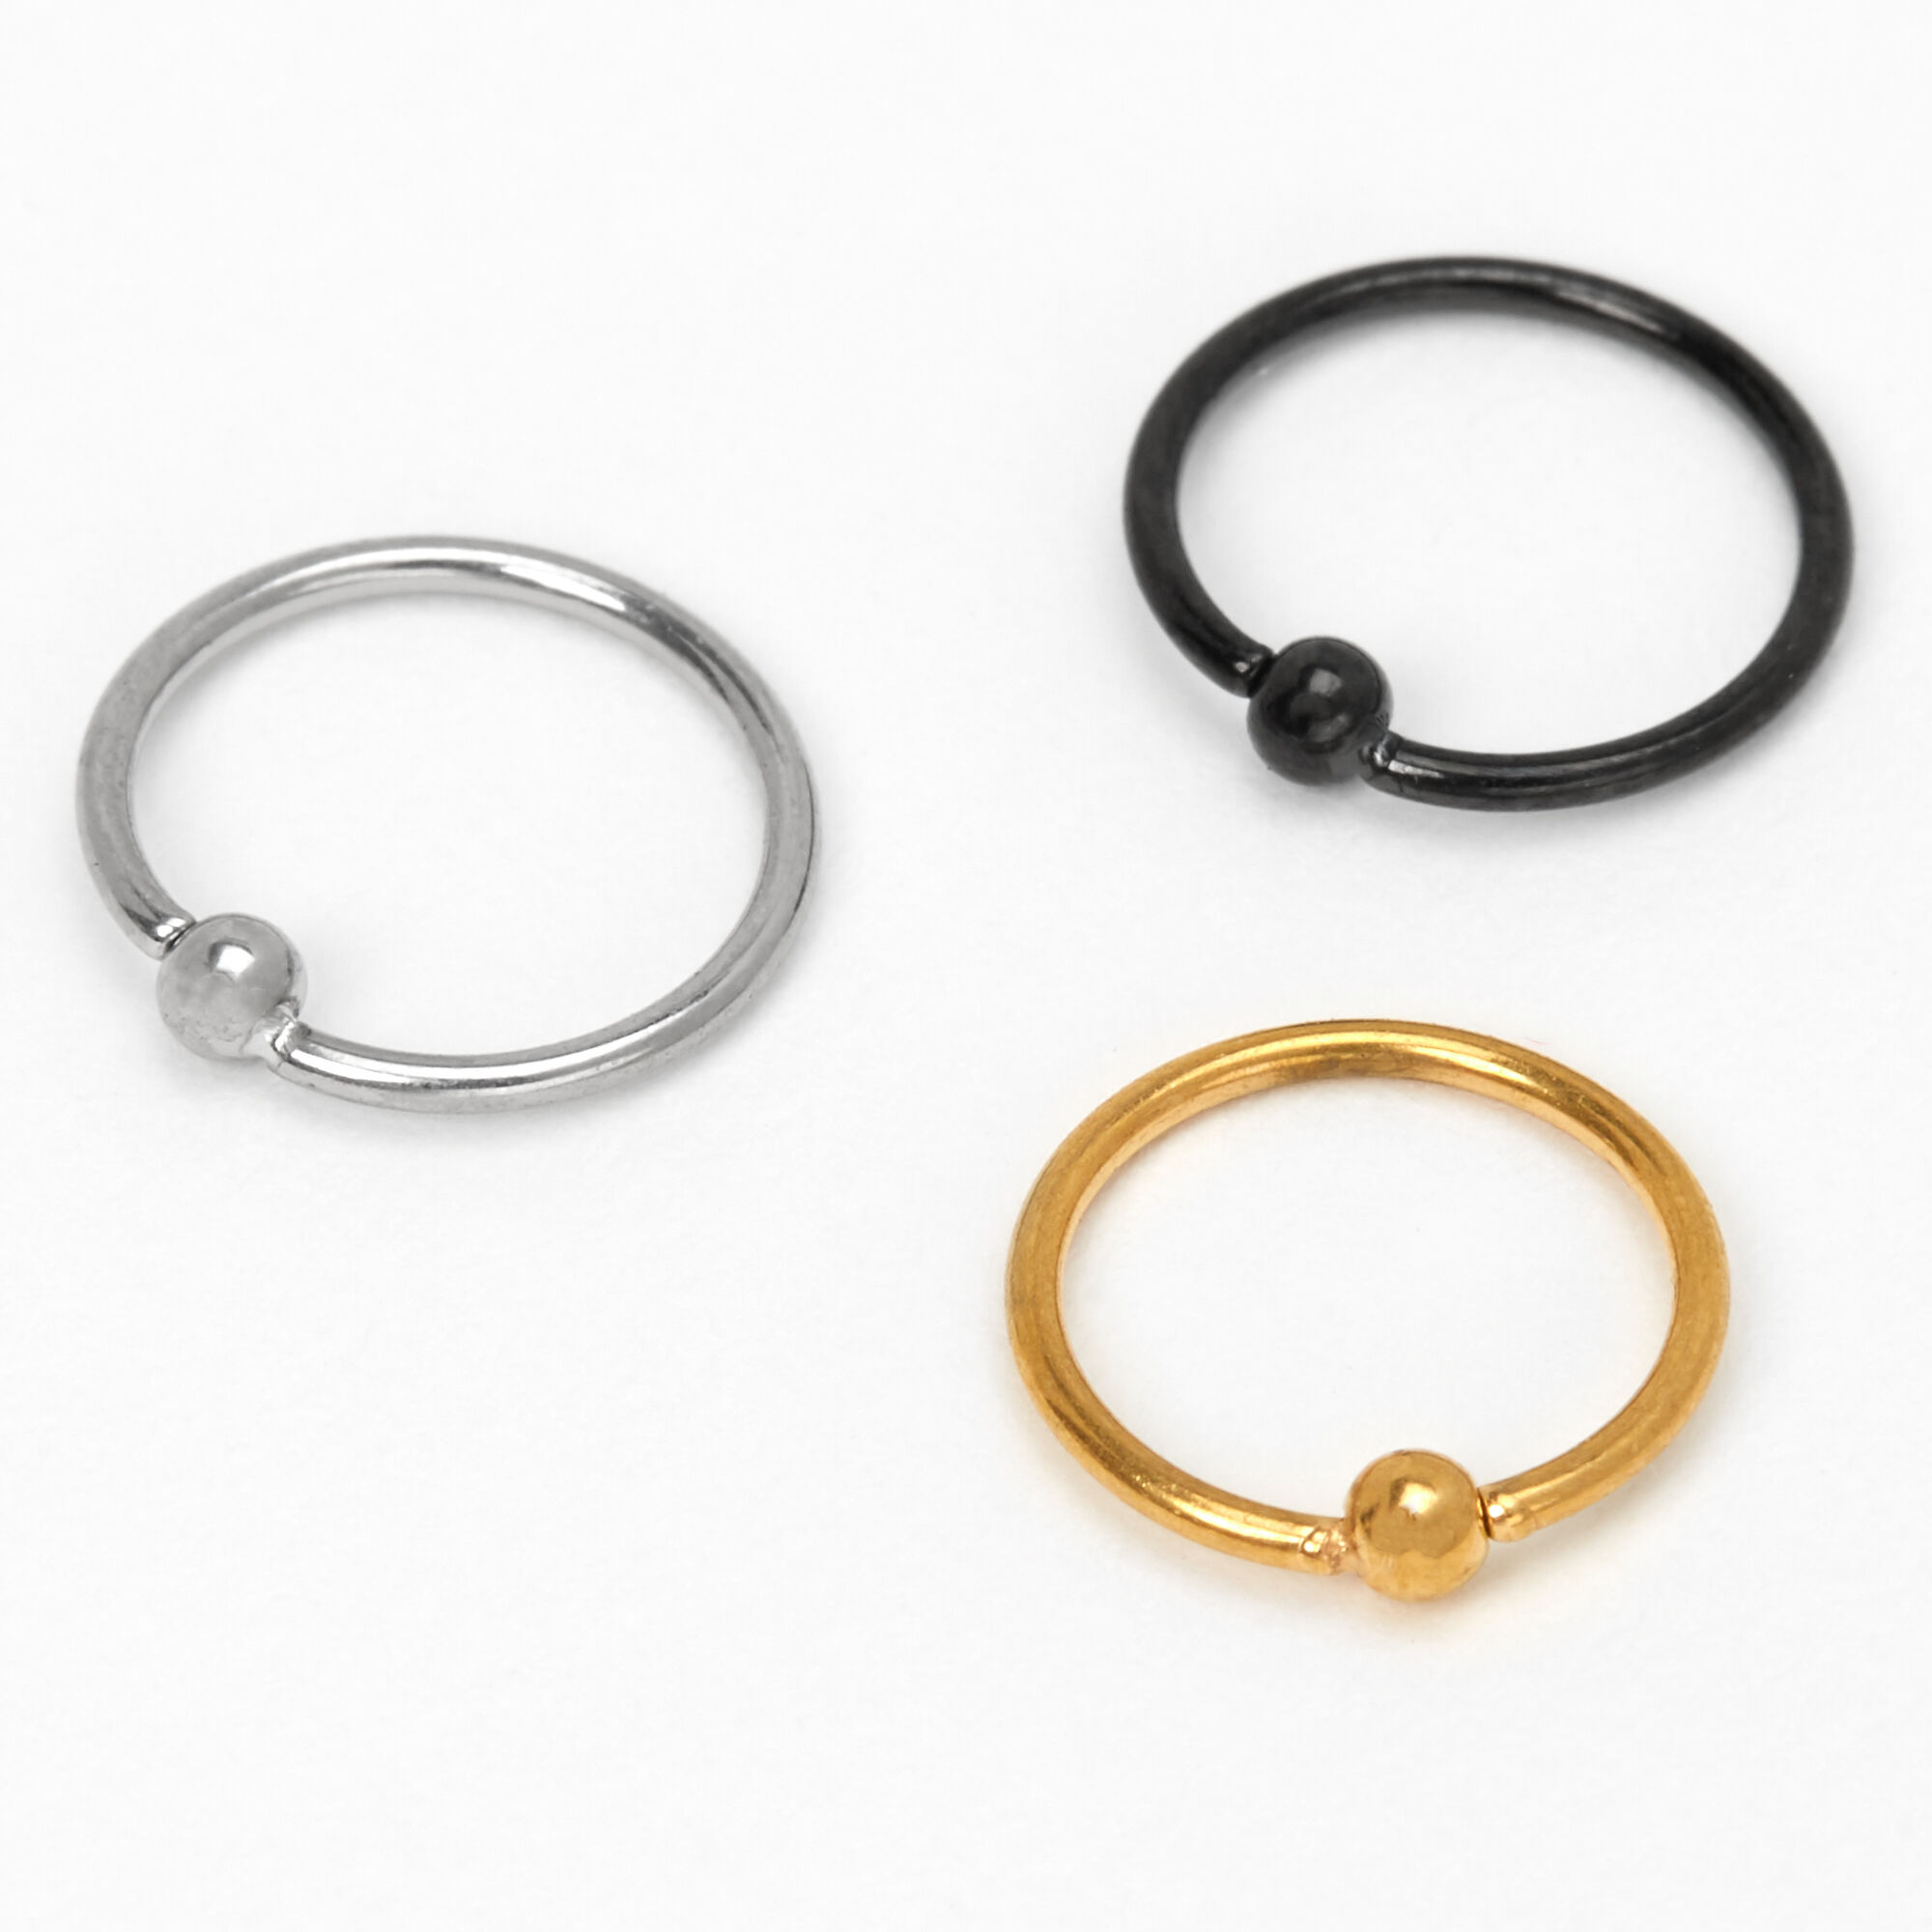 View Claires Mixed Metal Titanium 20G Ball Hoop Nose Rings 3 Pack Gold information